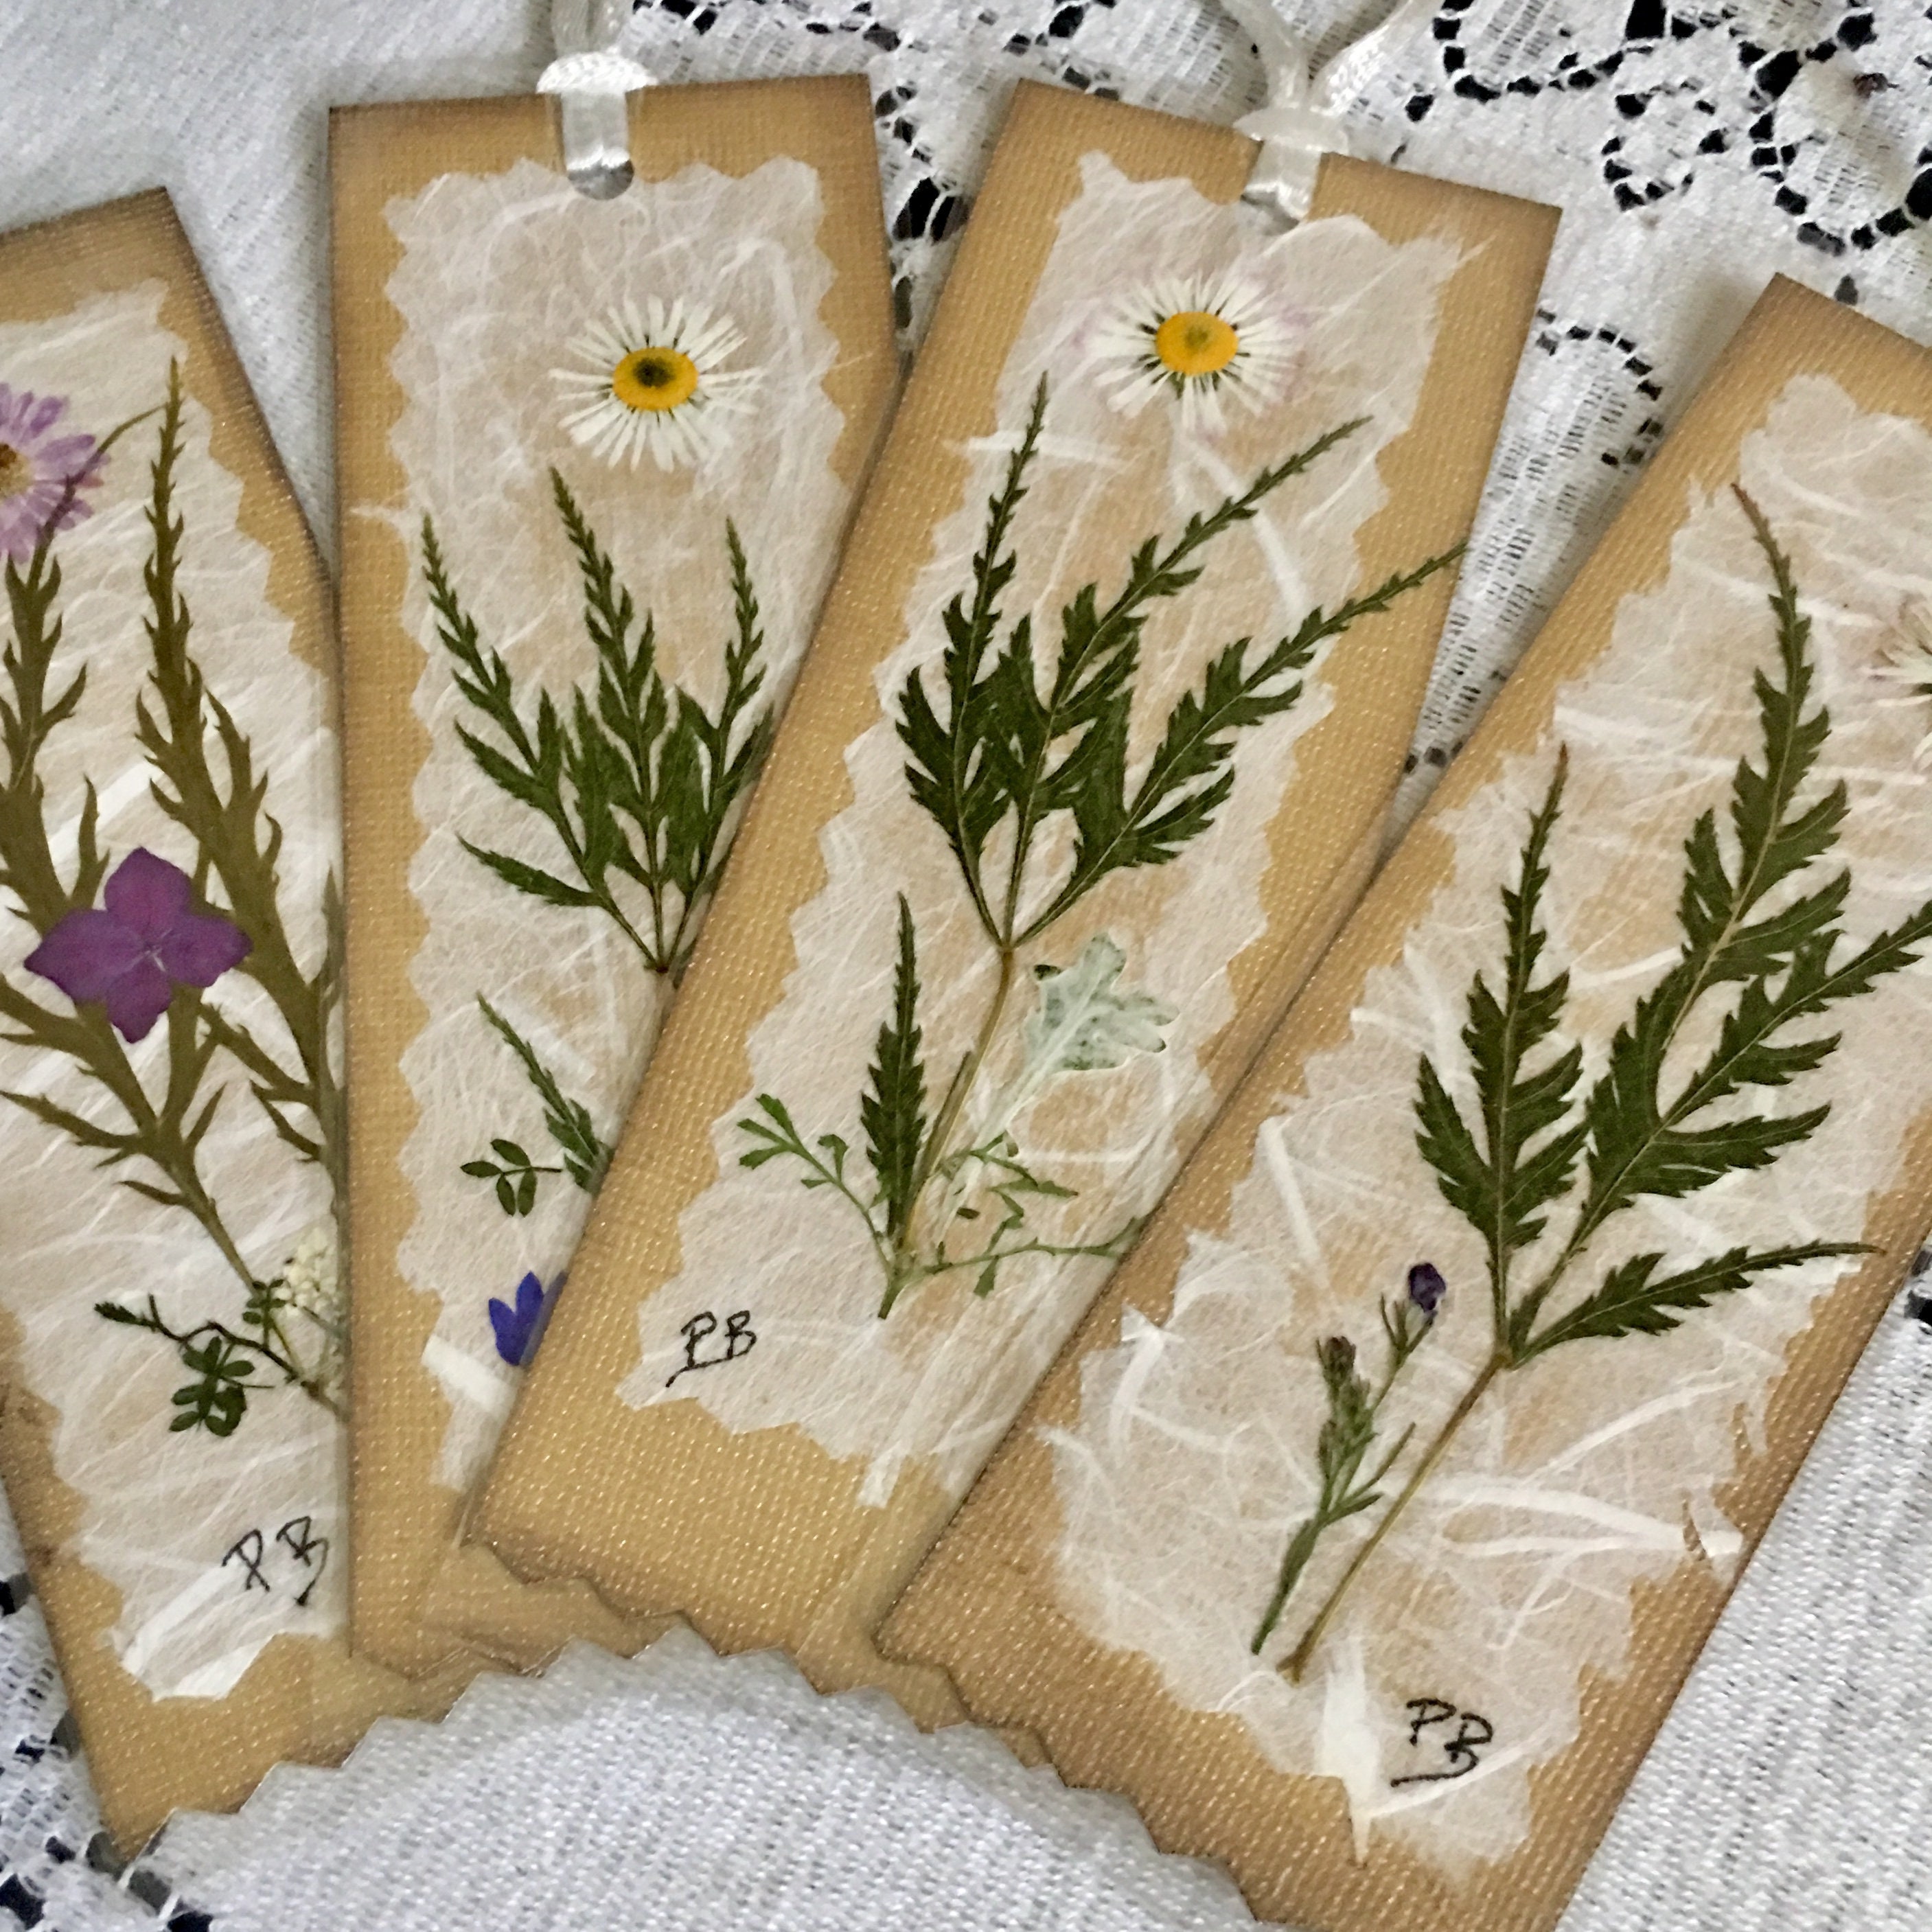 REAL Pressed Flower Bookmark, Botanical Bookmark, Gardeners Gift, Reading  Gift, Buttercup, Daisy Bookmarks. Flower Bookmarks. Buttercups. -   Norway